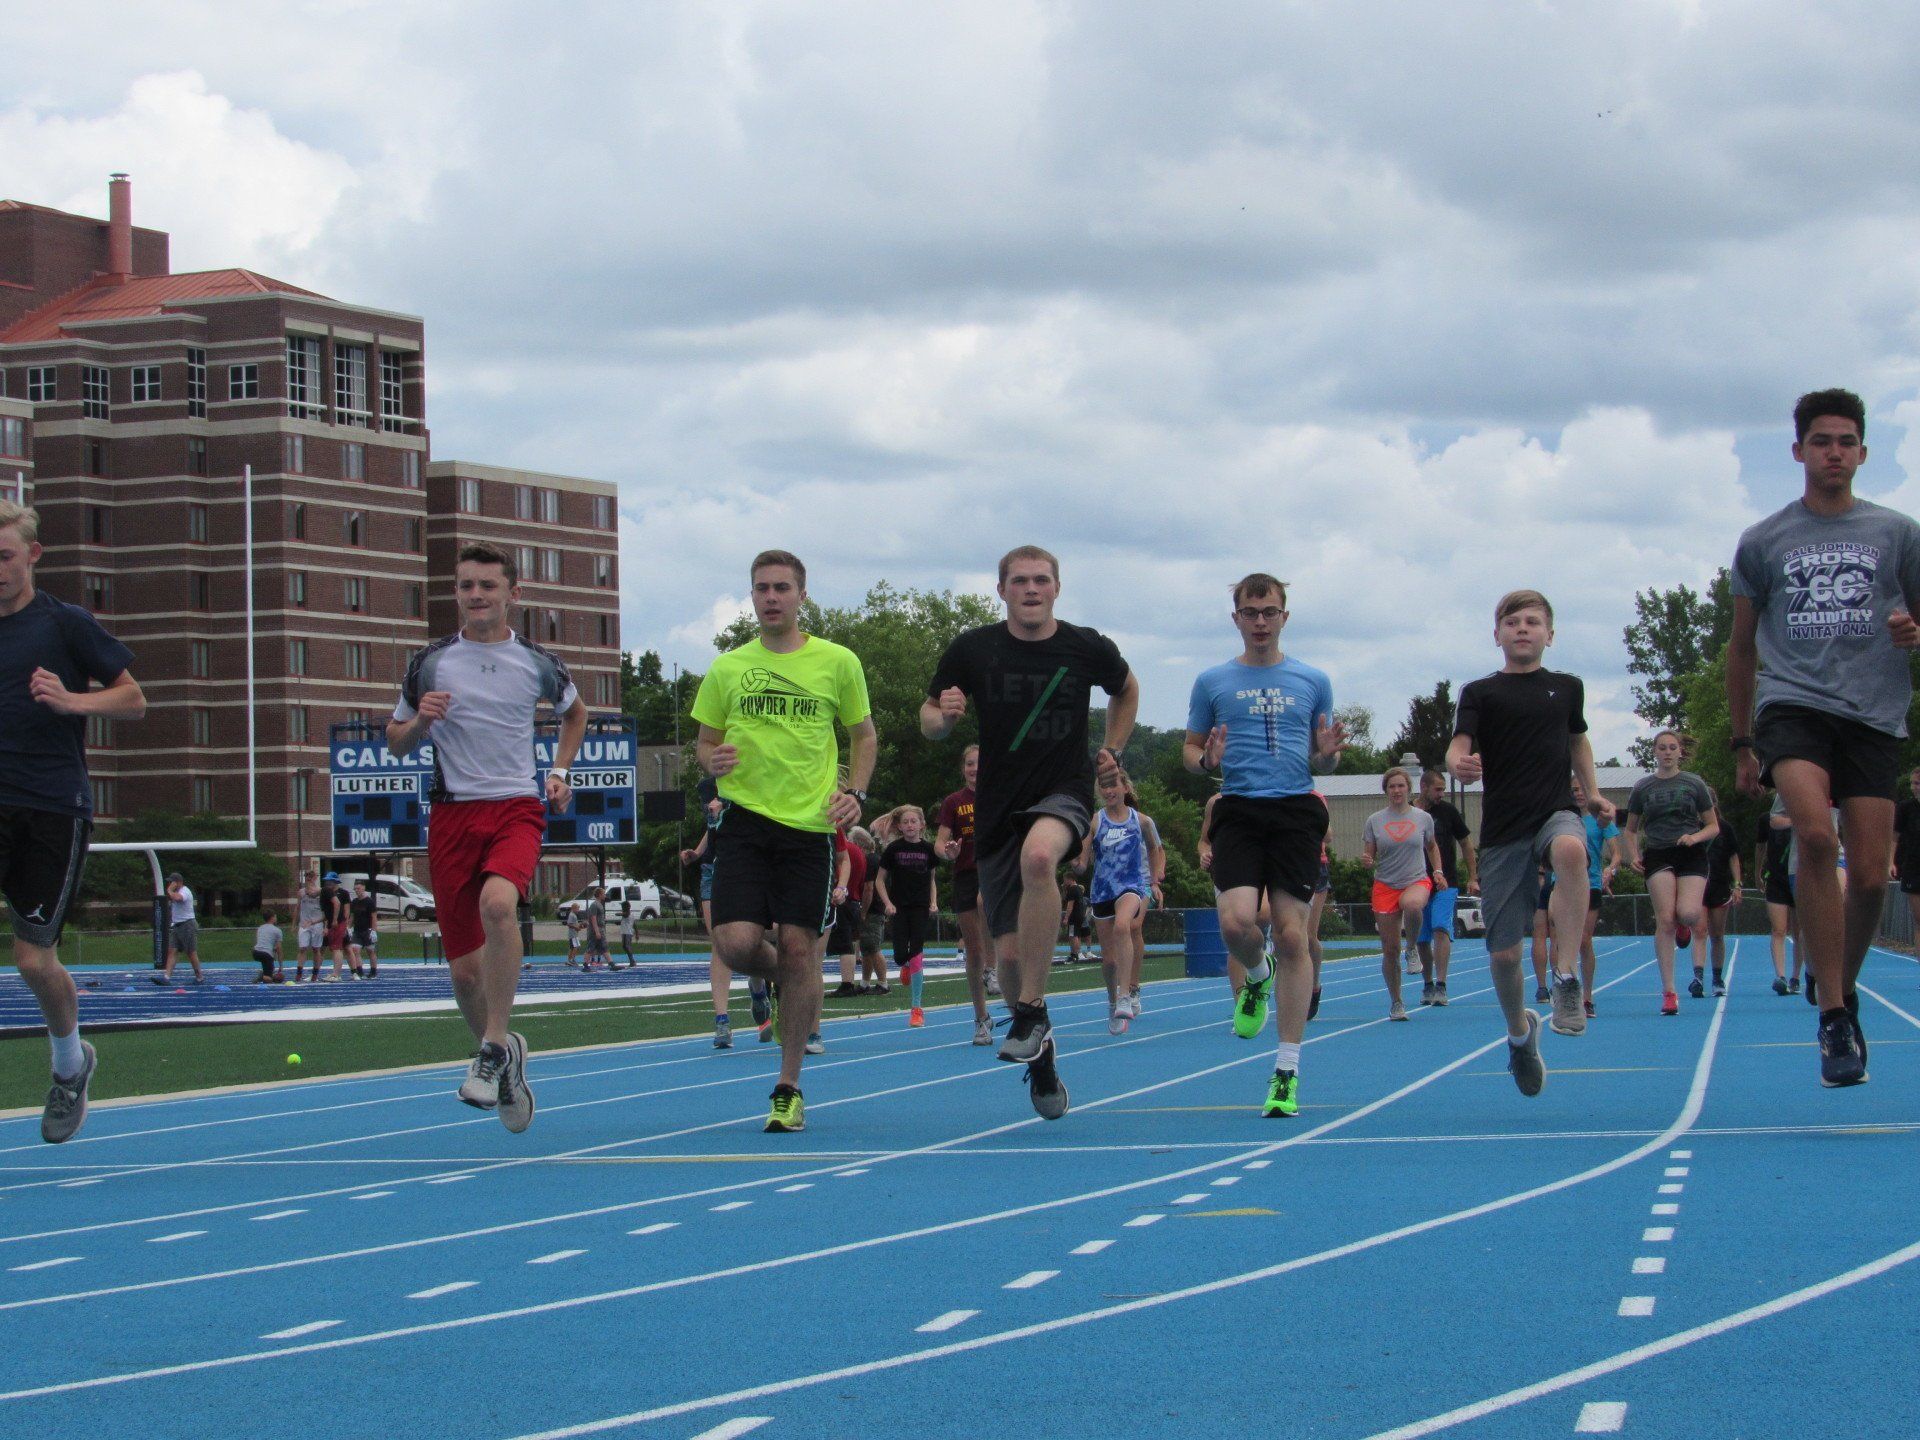 Male athletes running on track course toward the camera, low angle view.